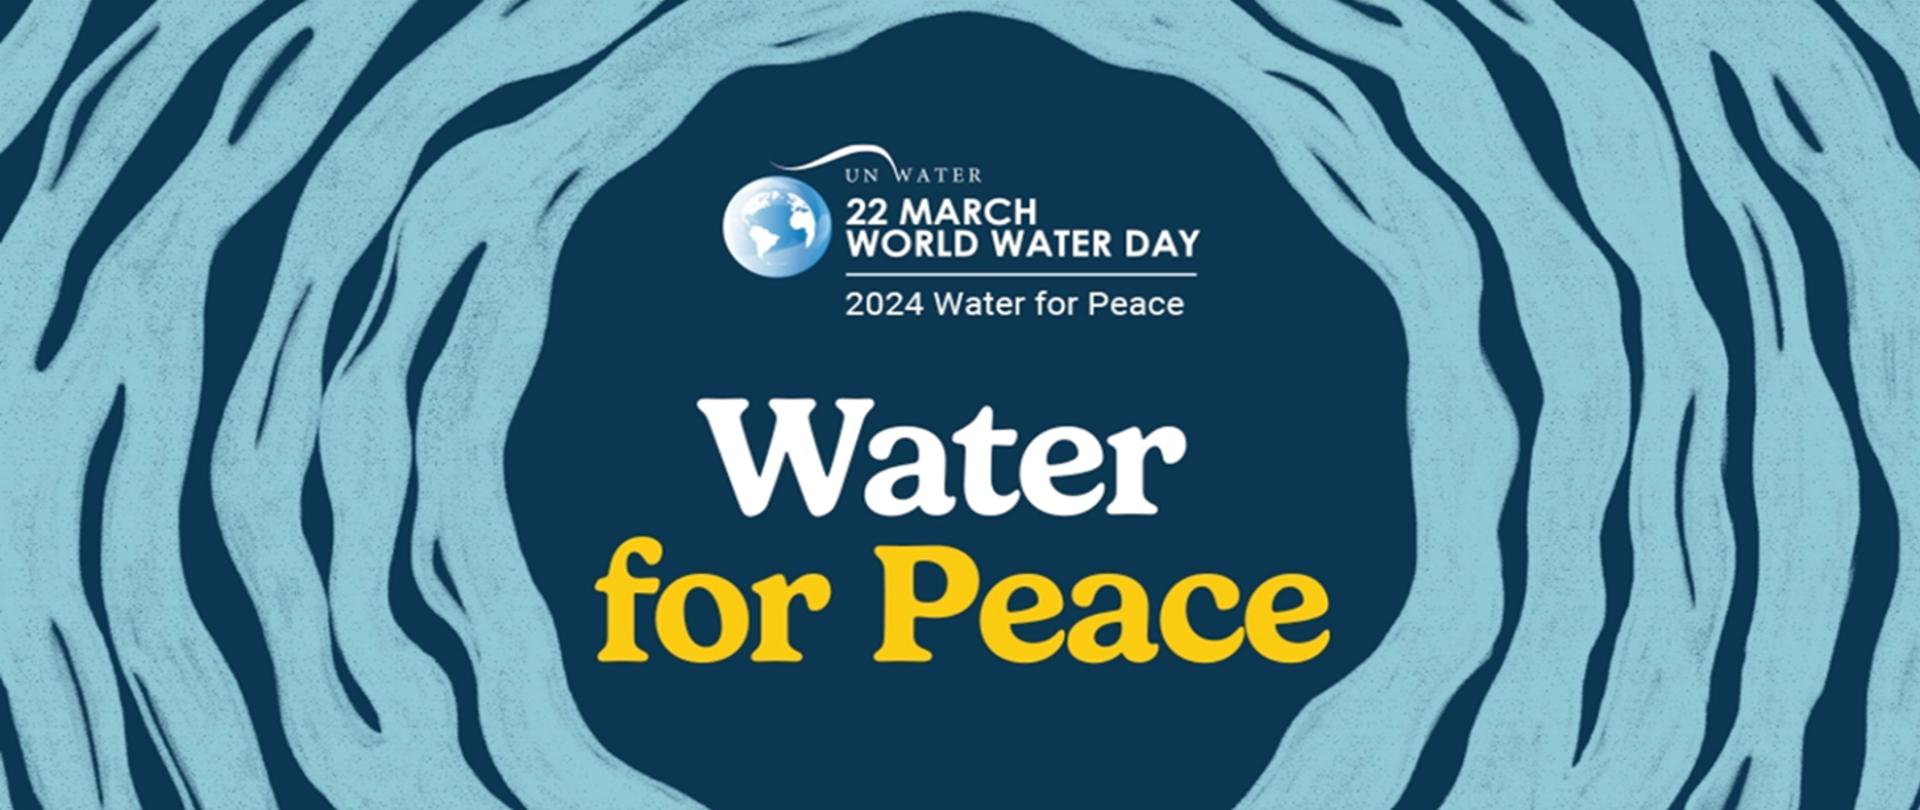 Napisy "Water for Peace" i "22 MARCH WORLD WATER DAY"